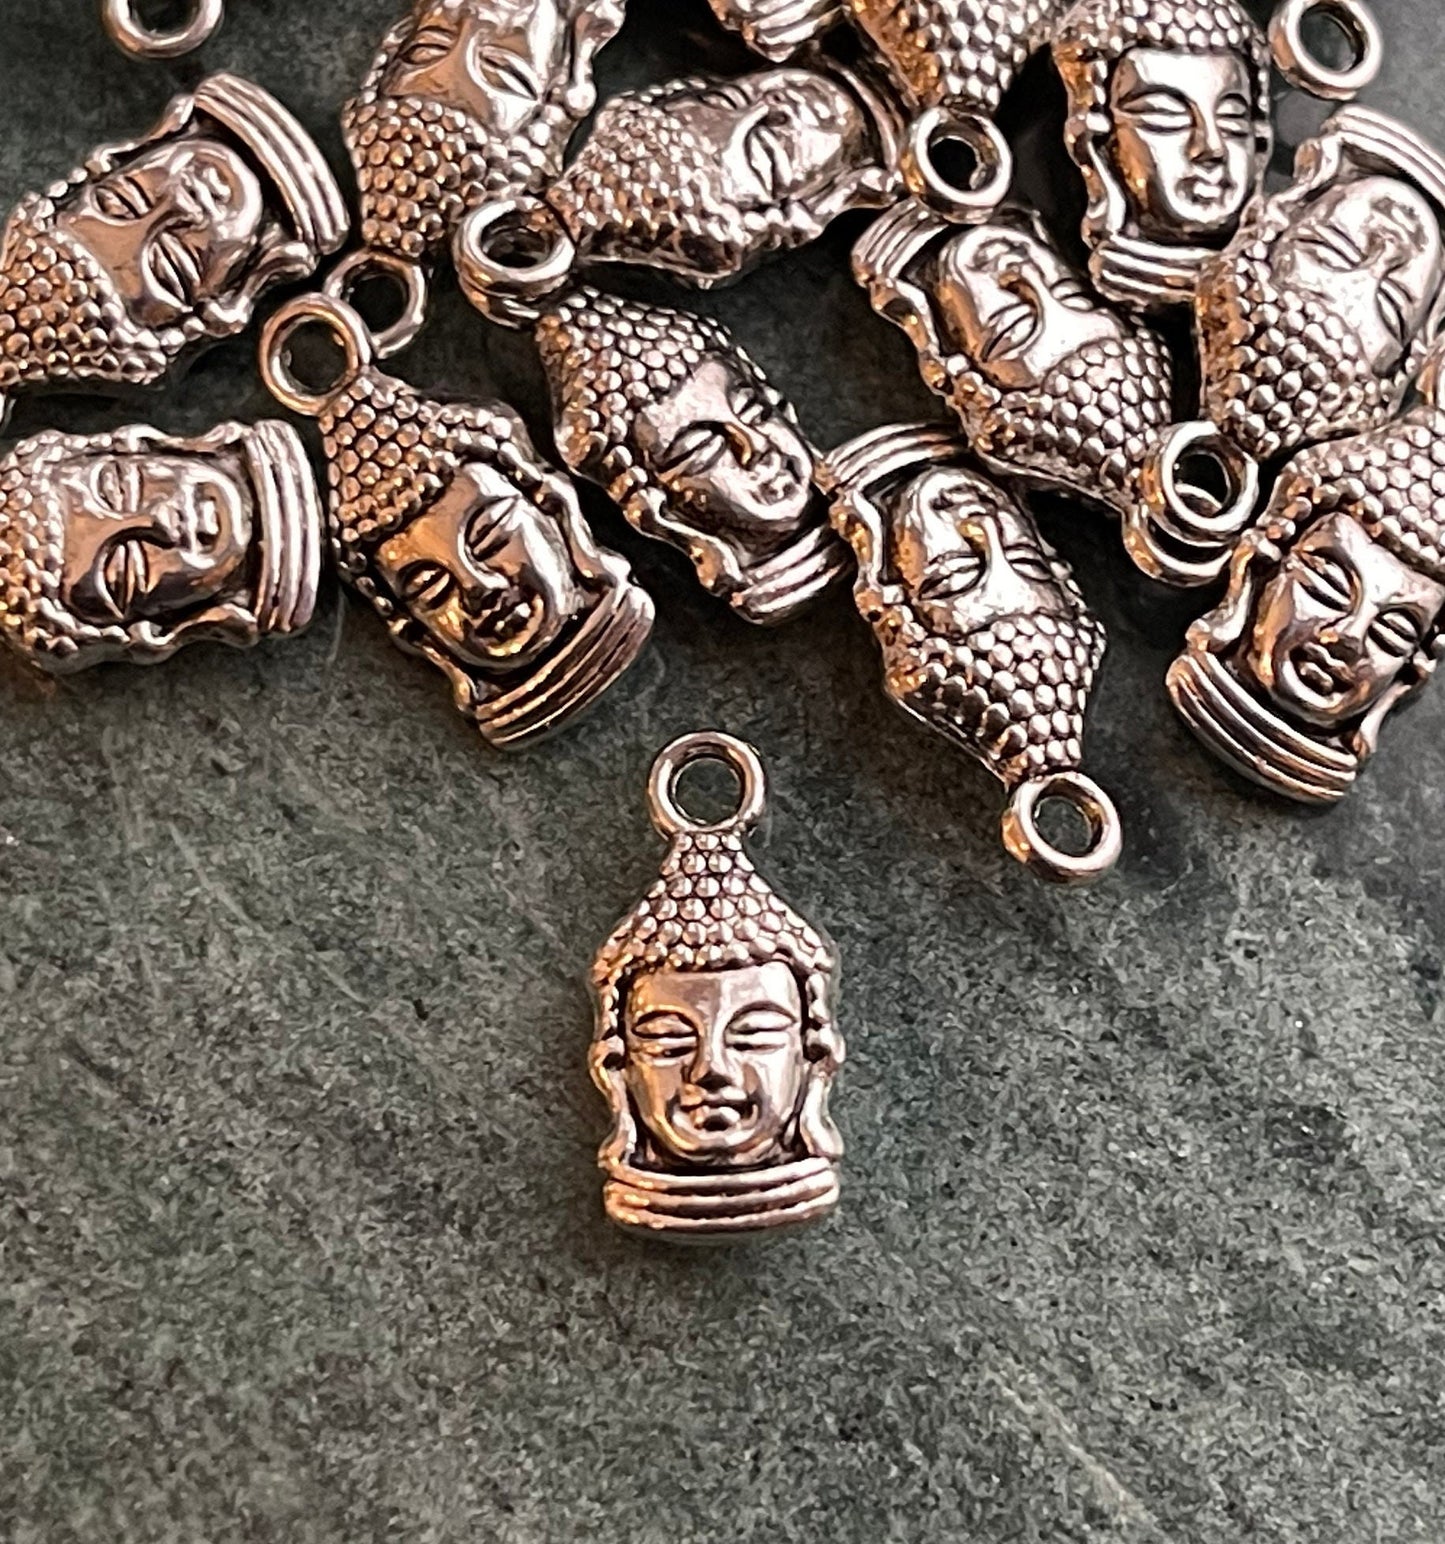 Buddhism Charm Set - Buddha, Quan Yin – choose one or all 3–premium charms, pendants for jewelry, necklace, bracelet